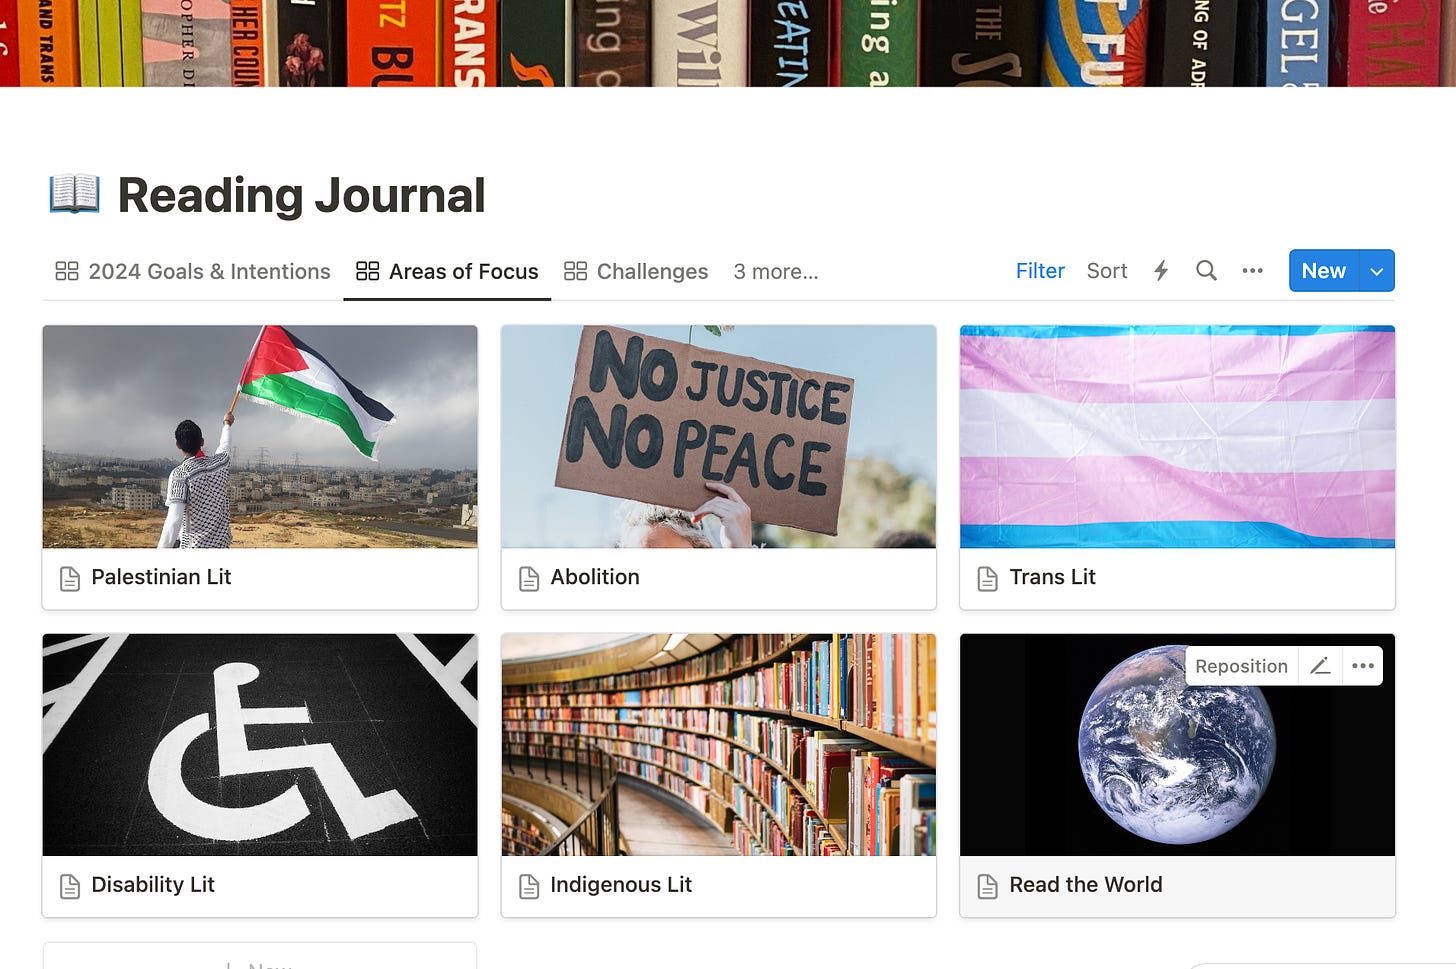 A screenshot of my Notion reading journal, showing six small cards displaying different areas of focus, each with a related image (a Palestinian flag, trans flag, map of the world, etc). 